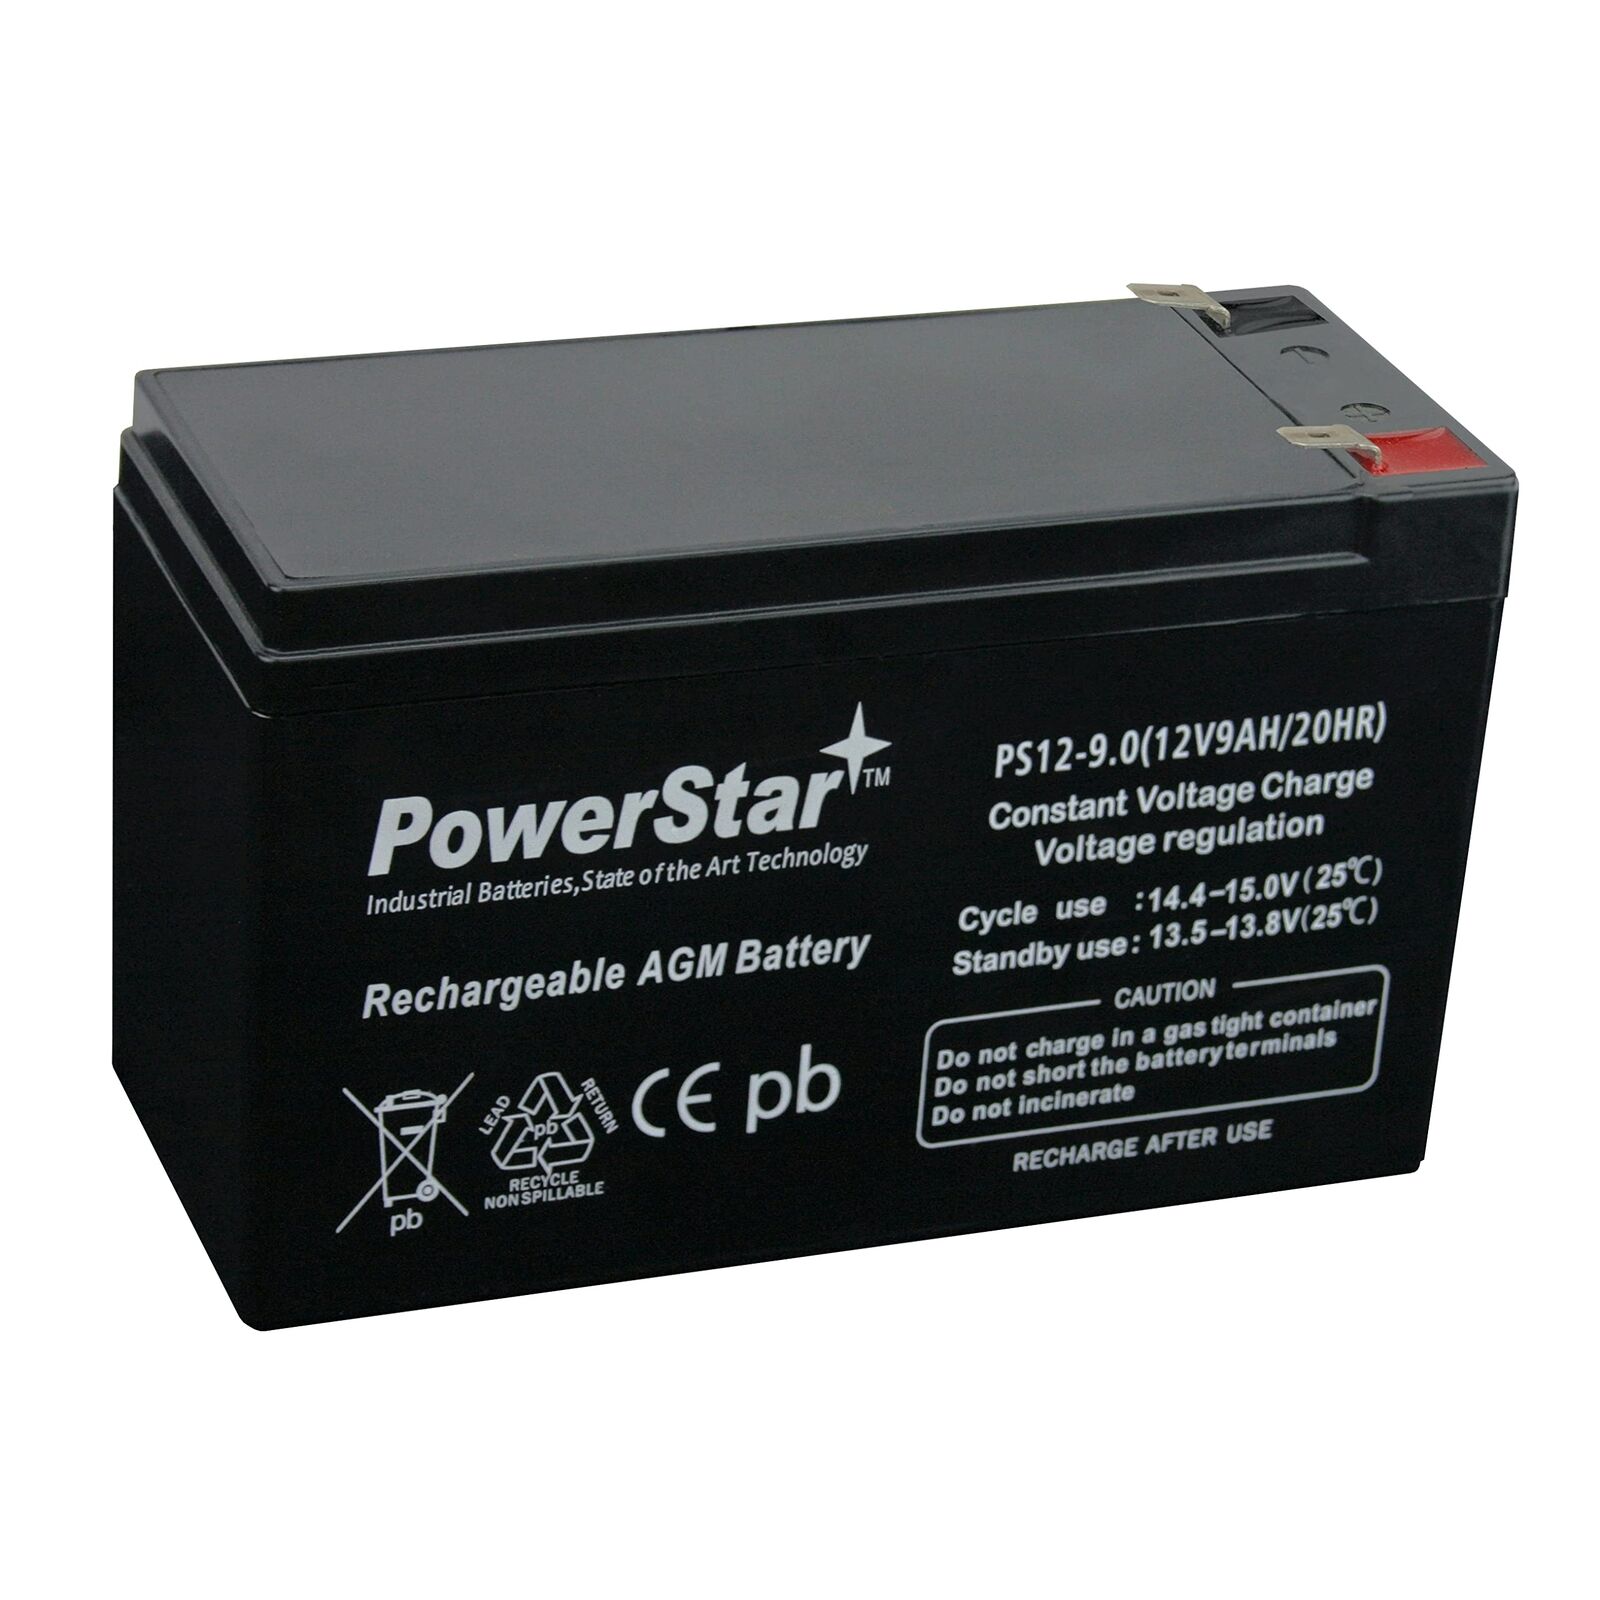 Replacement UPS Battery Pack for Compatible with APC BE650G1 - Compatible wit...